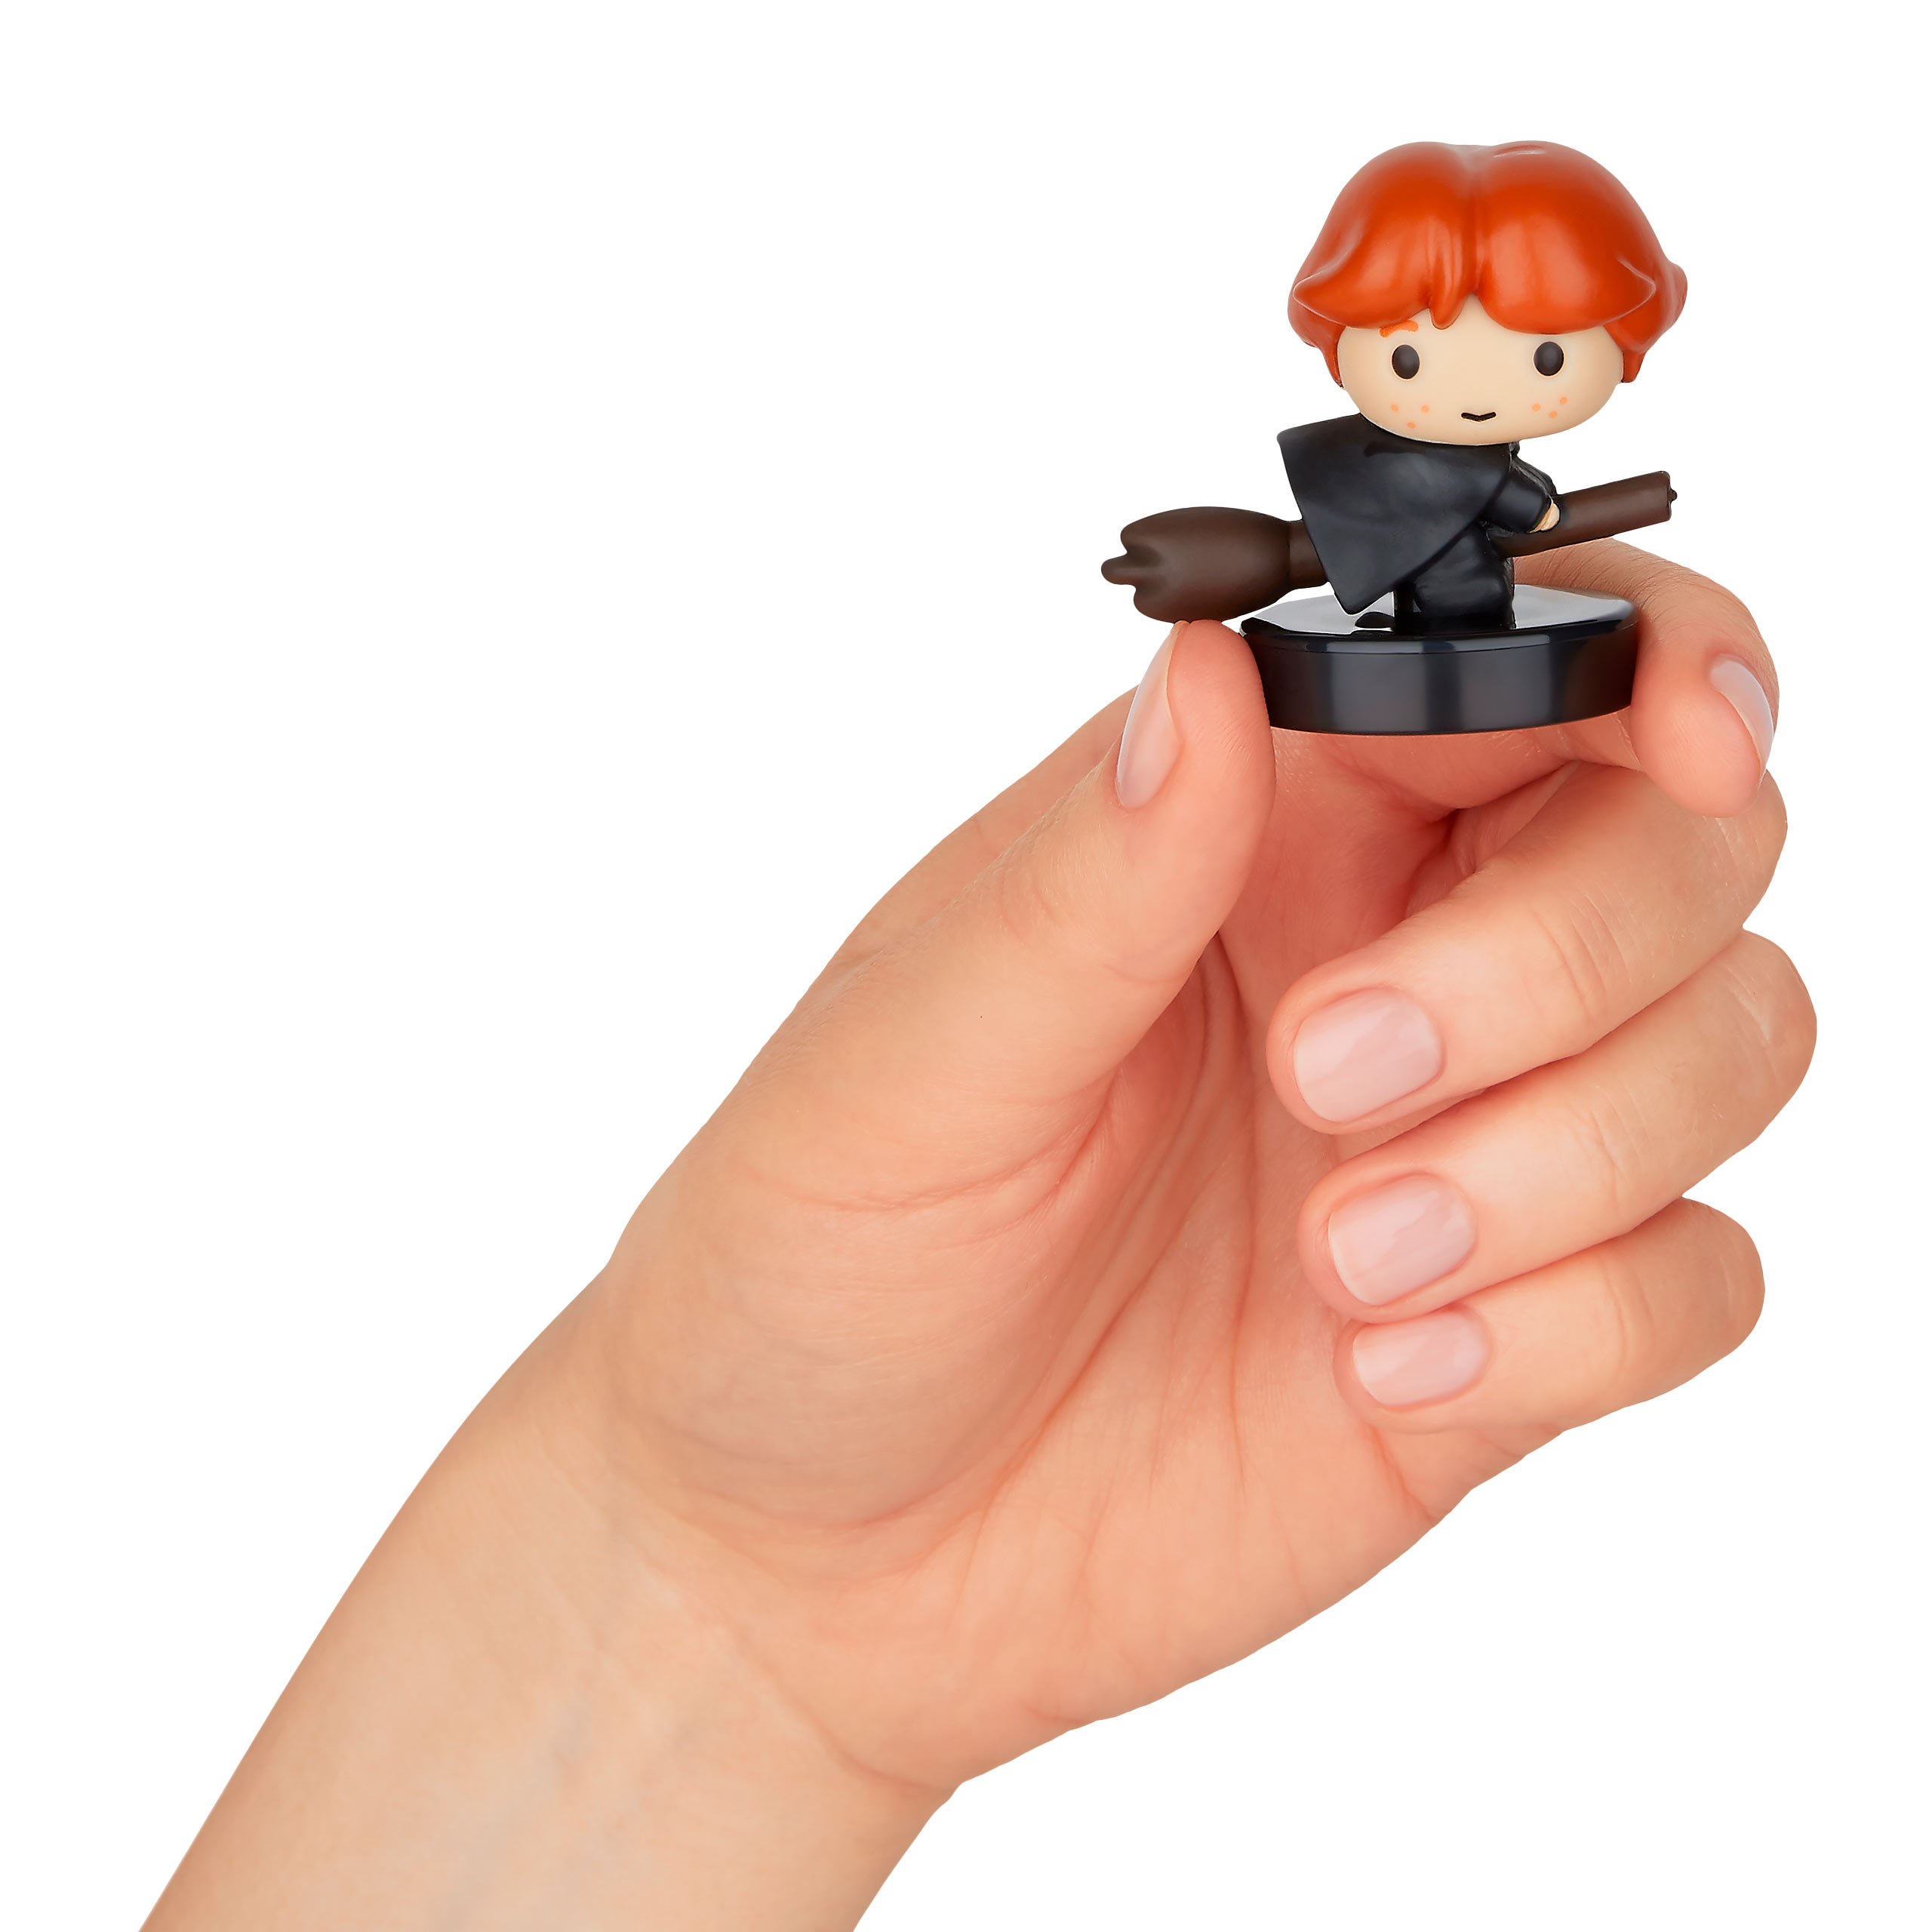 Harry Potter - Mystery Minis Figure with Stamp